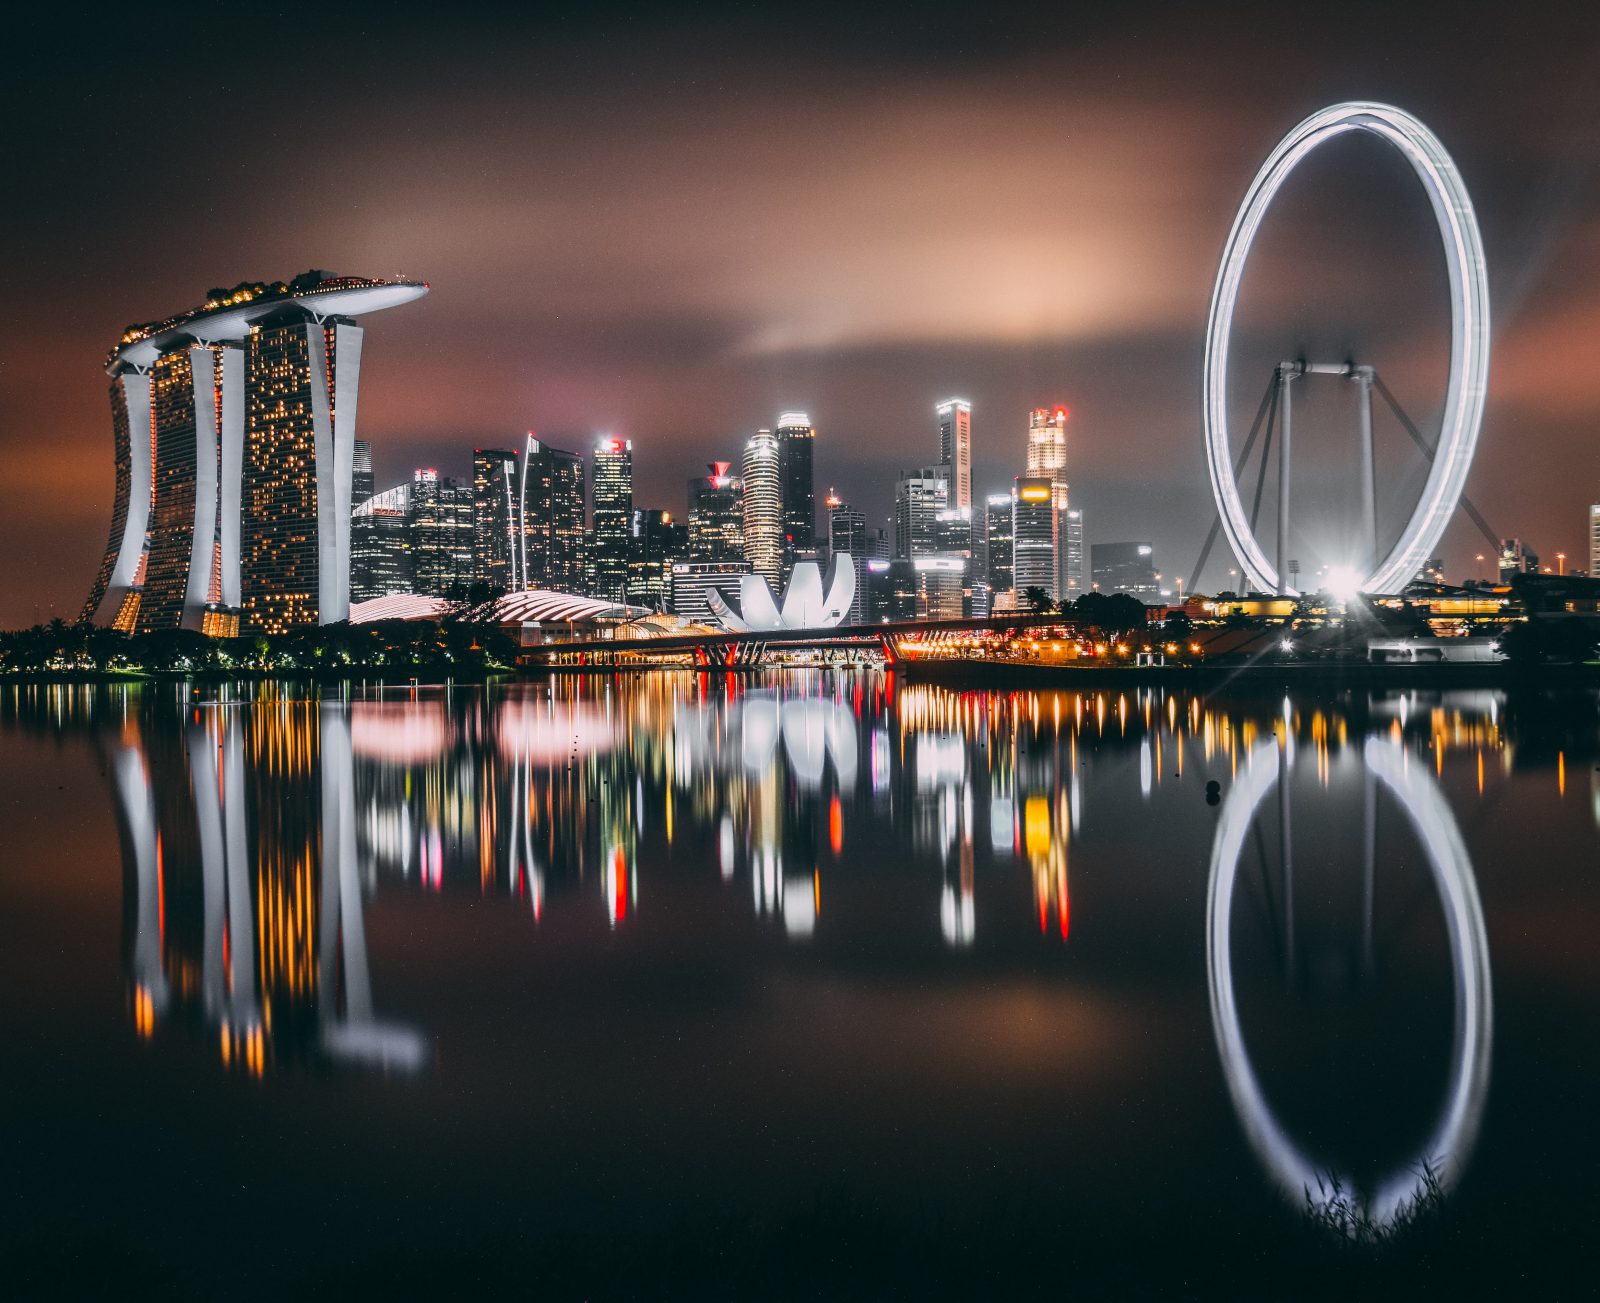 How to find a job in Singapore as a foreigner